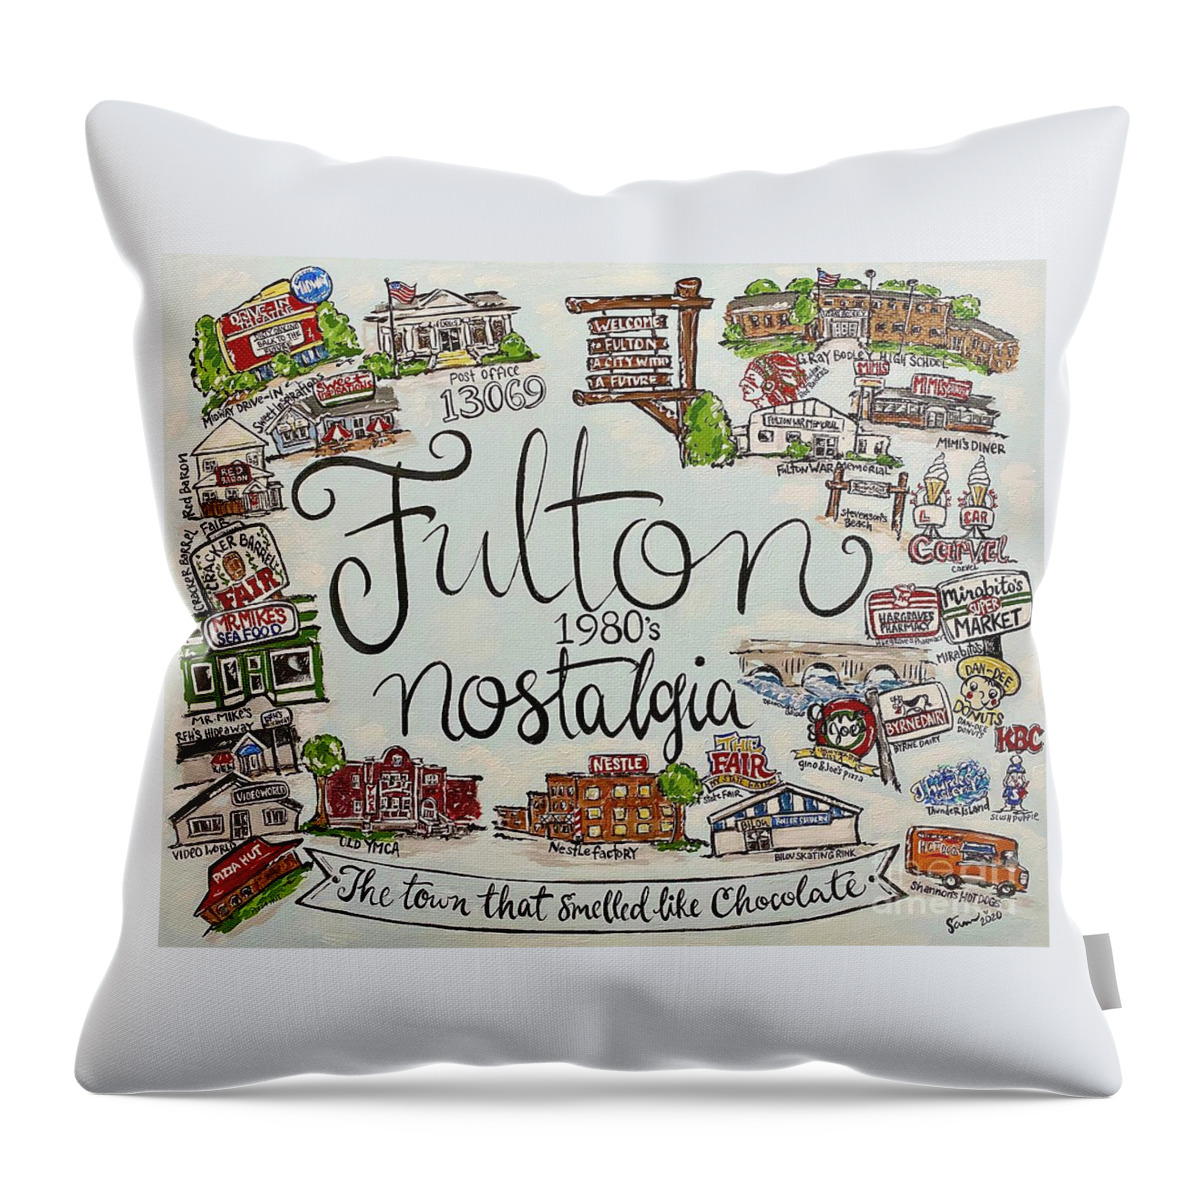 Illustration Throw Pillow featuring the painting Fulton Nostalgia by Samantha Centers